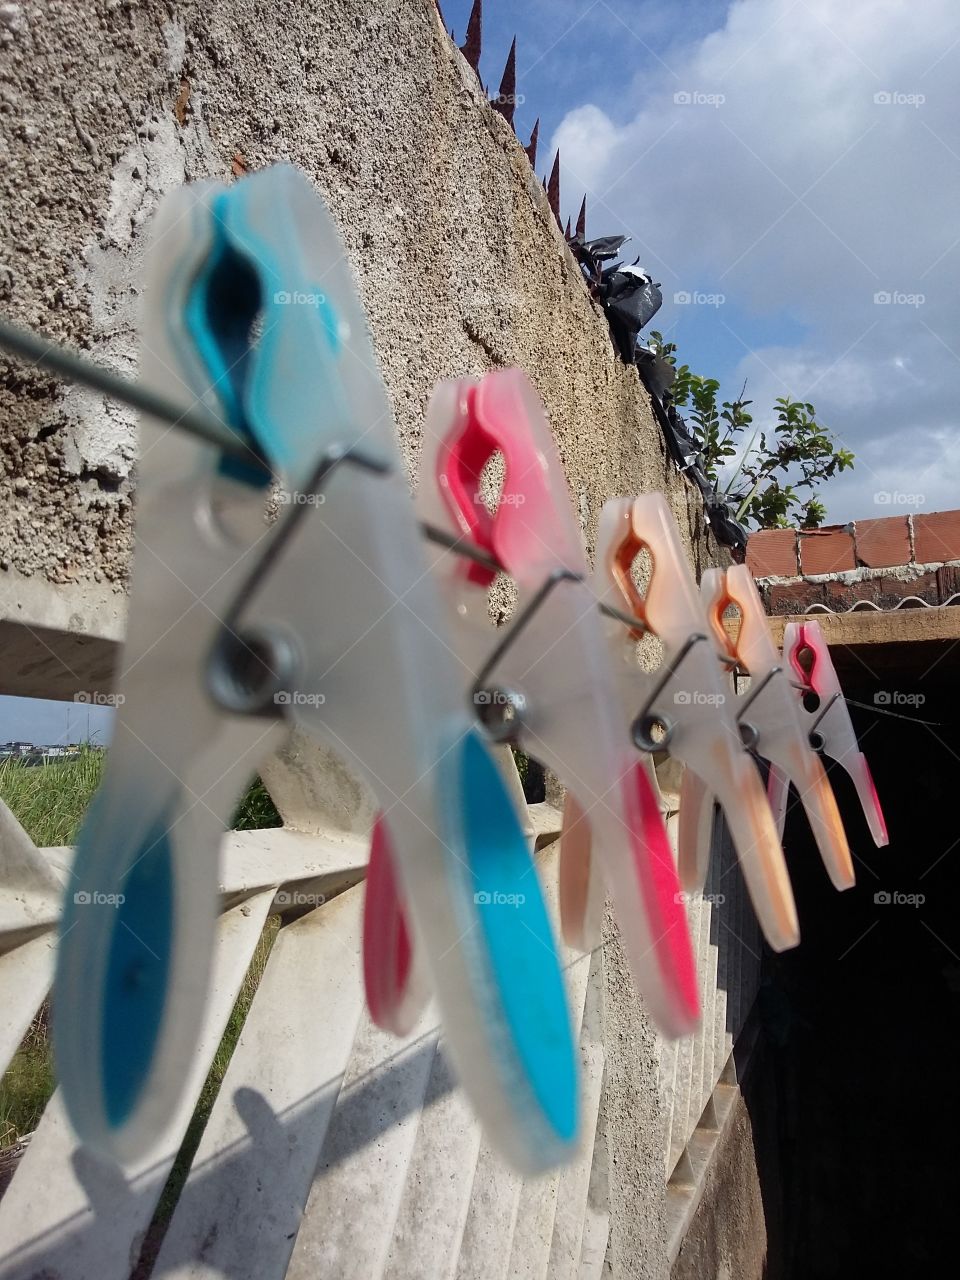 Colorful clothespins on the clothesline.